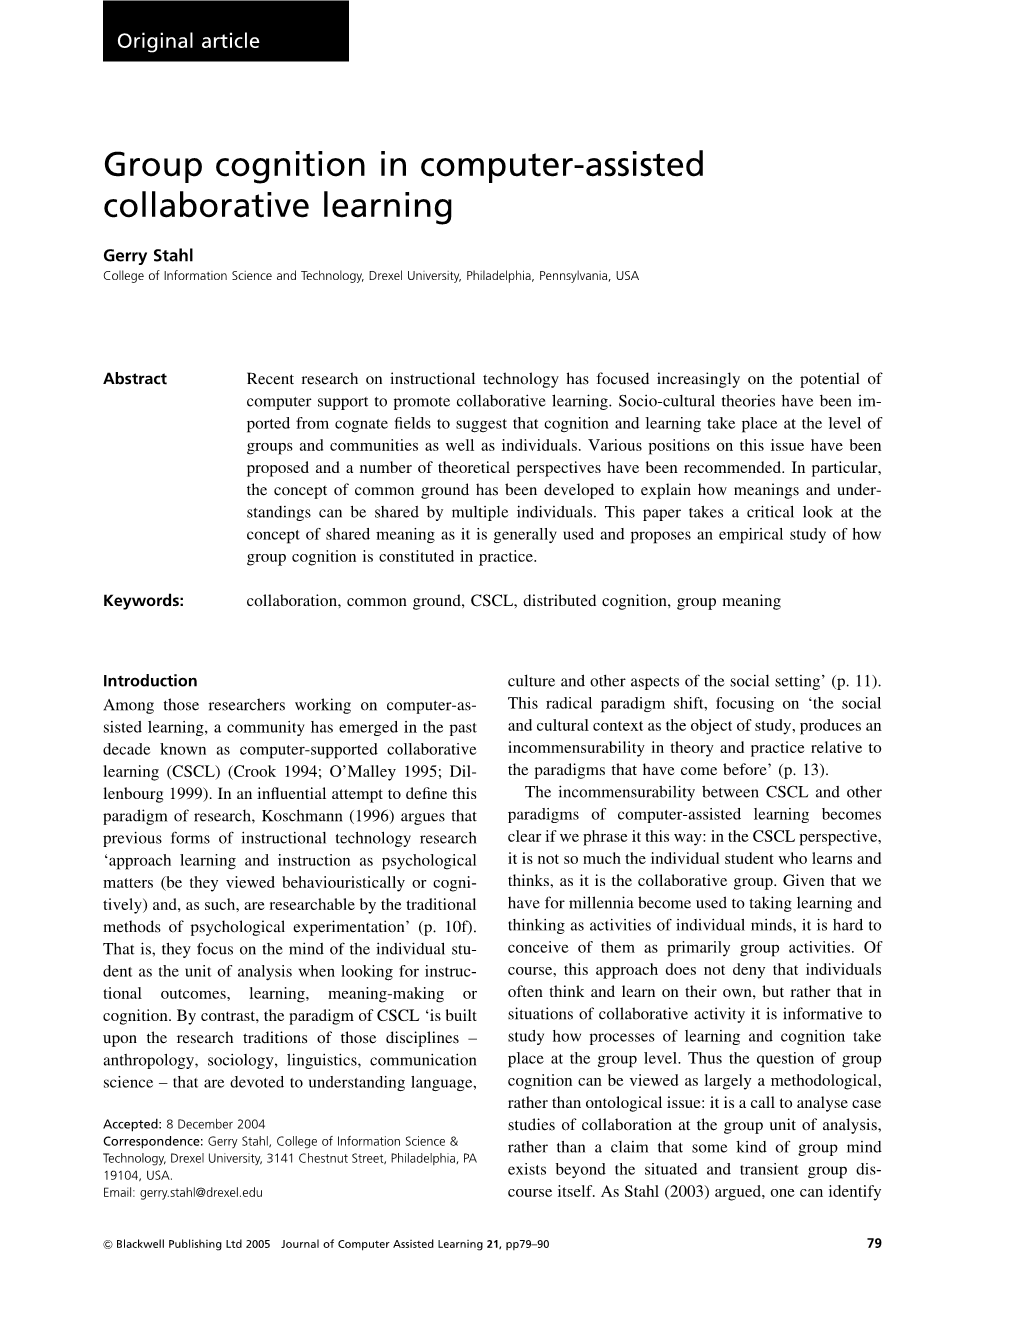 Group Cognition in Computer-Assisted Collaborative Learning